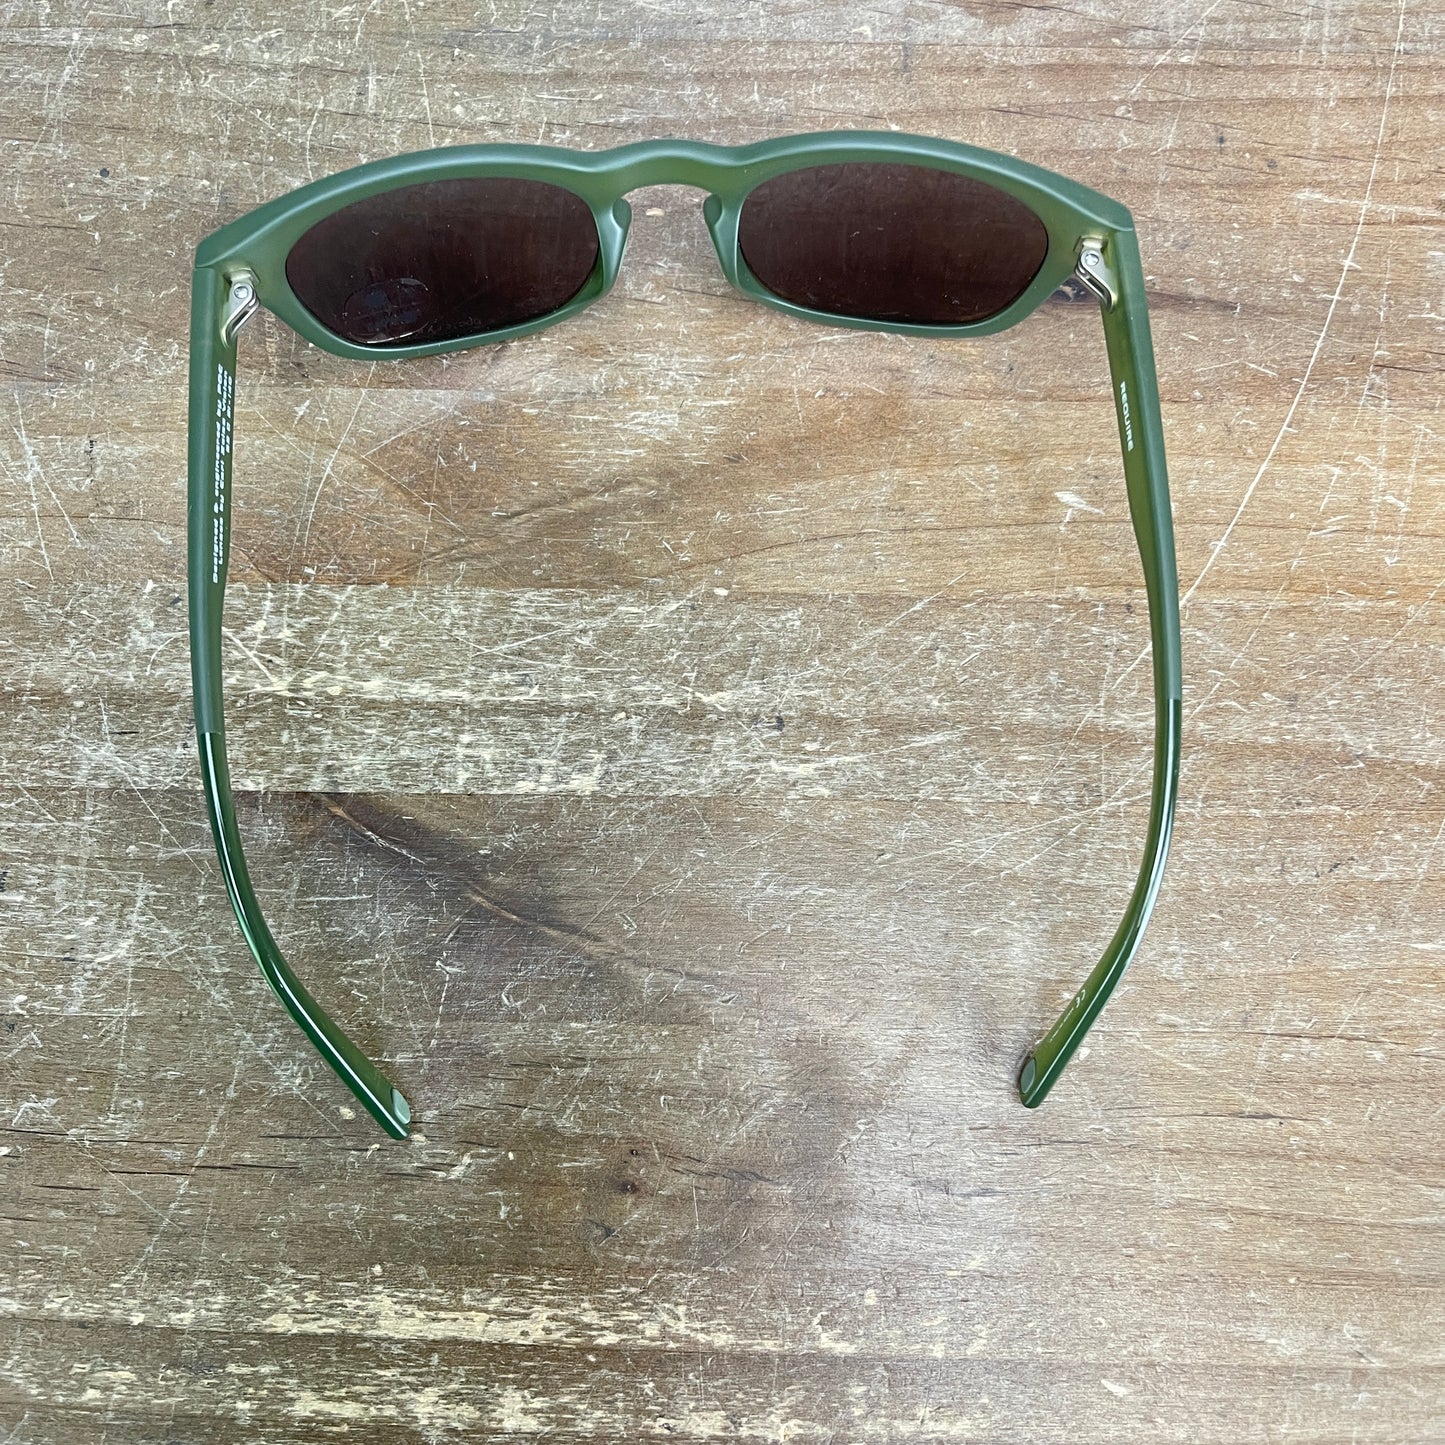 New! POC Require Epidote Green Translucent Violet / Silver Mirror Cycling Sunglasses